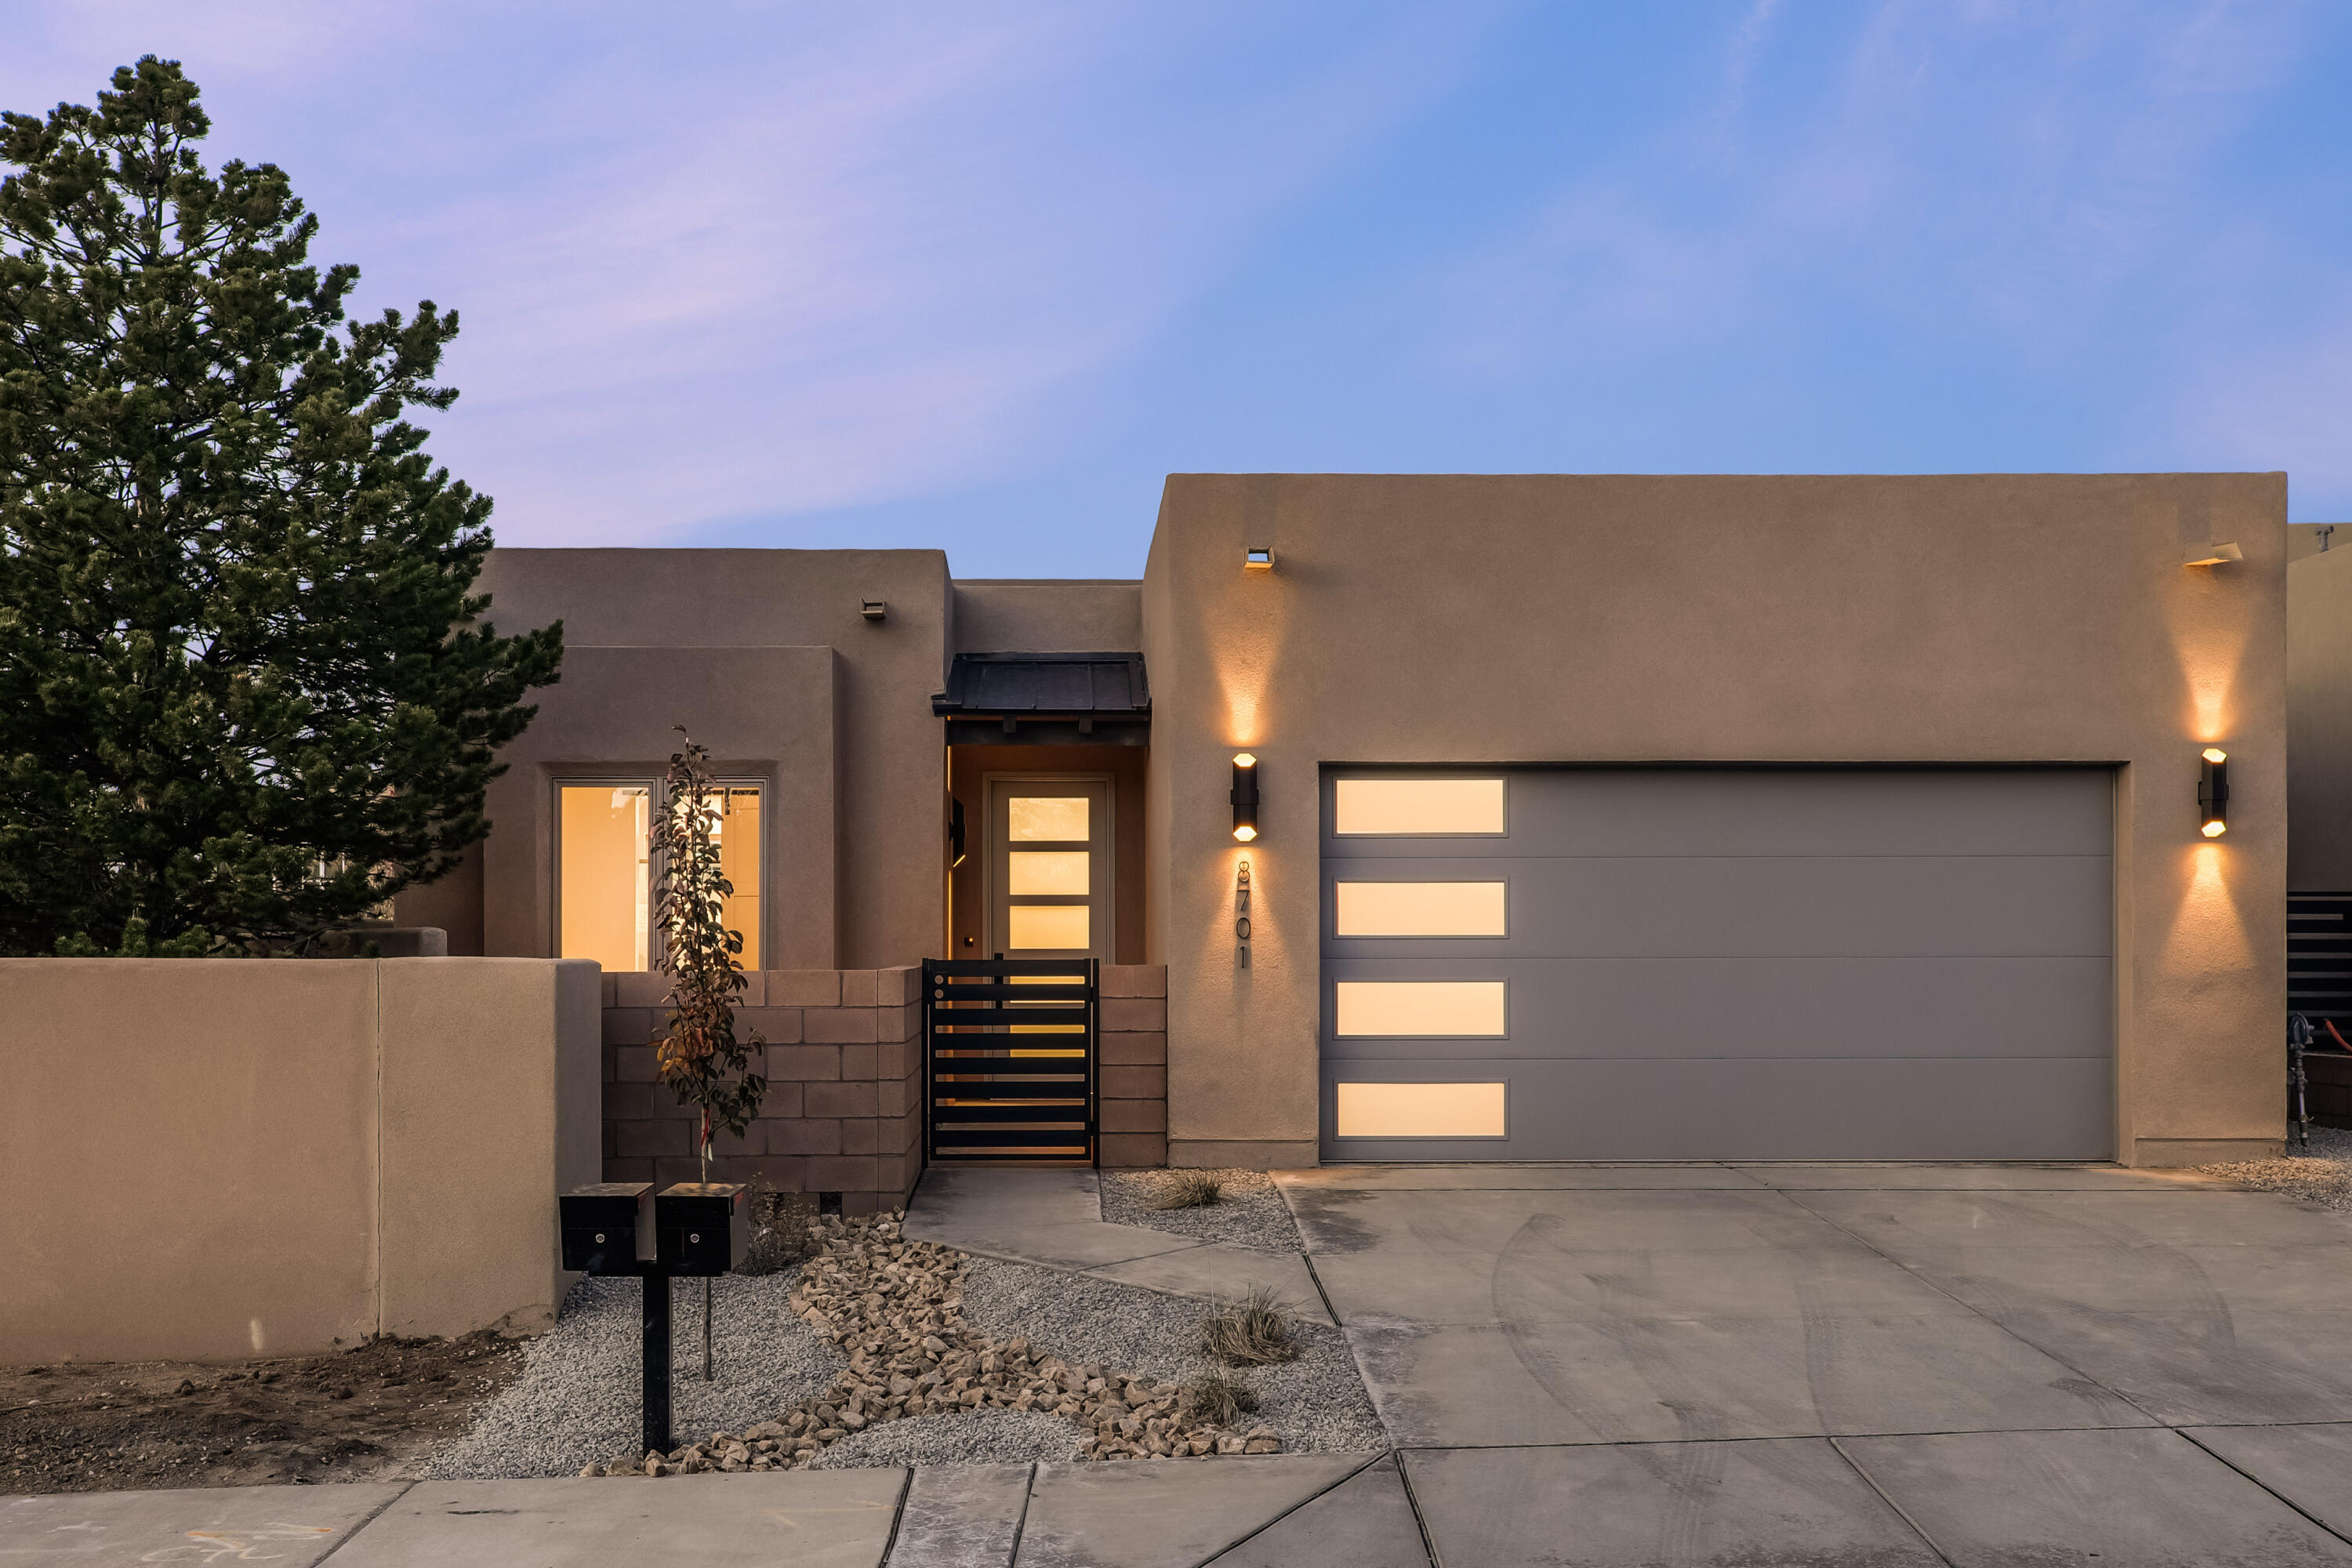 OPEN HOUSE Sunday 12-2.  Welcome to this new construction, one-story home located in the heart of Albuquerque. This property boasts three spacious bedrooms, all designed with modern aesthetics and comfort in mind. Built by Las Ventanas Homes, a local builder known for their commitment to quality and attention to detail. NM Green Build Silver Certified, meeting high standards for energy efficiency. You'll be greeted by a modern open floor plan that seamlessly connects the living areas, creating a perfect space for entertaining or family gatherings. Kitchen is equipped with state-of-the art appliances and sleek countertops. Each bedroom offers generous space, large windows that allow for plenty of light